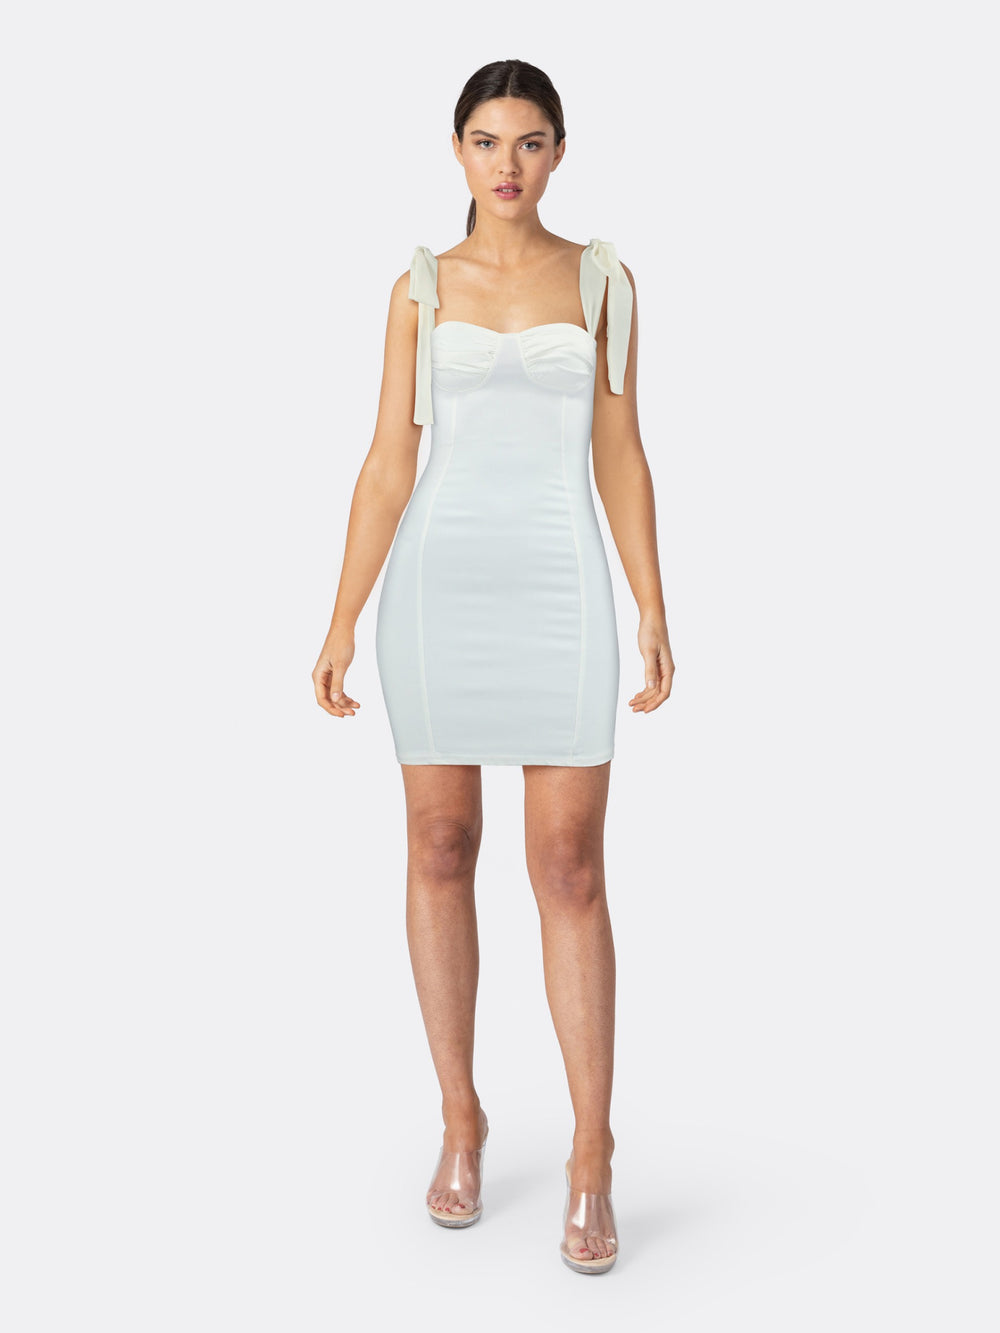 Skinny Short Dress with Tie Straps White Front